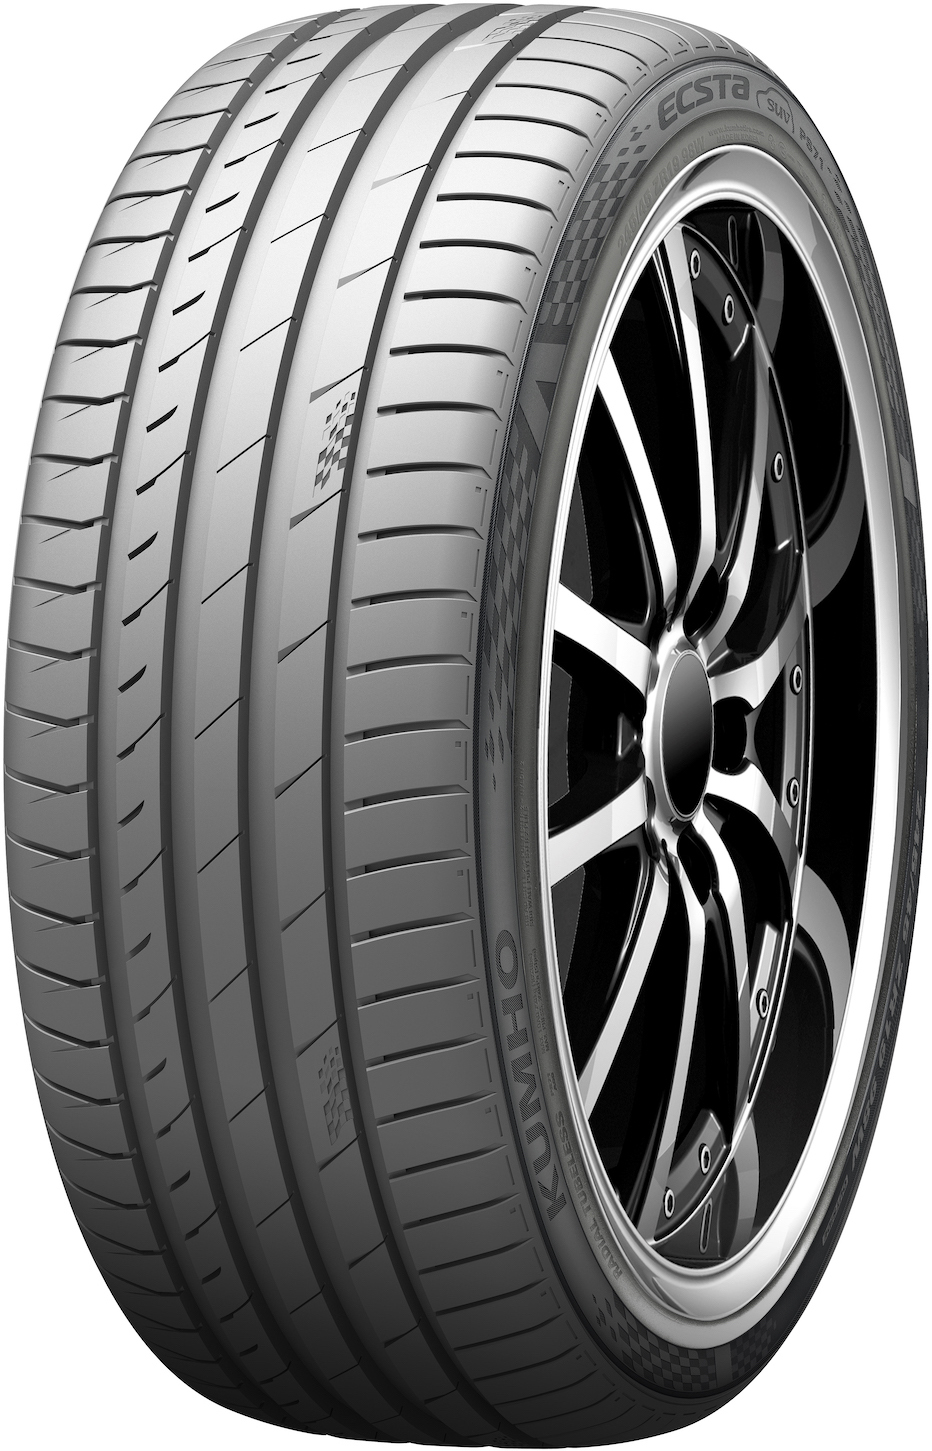 Anvelope auto KUMHO Ecsta PS71 SUV 285/45 R20 112Y